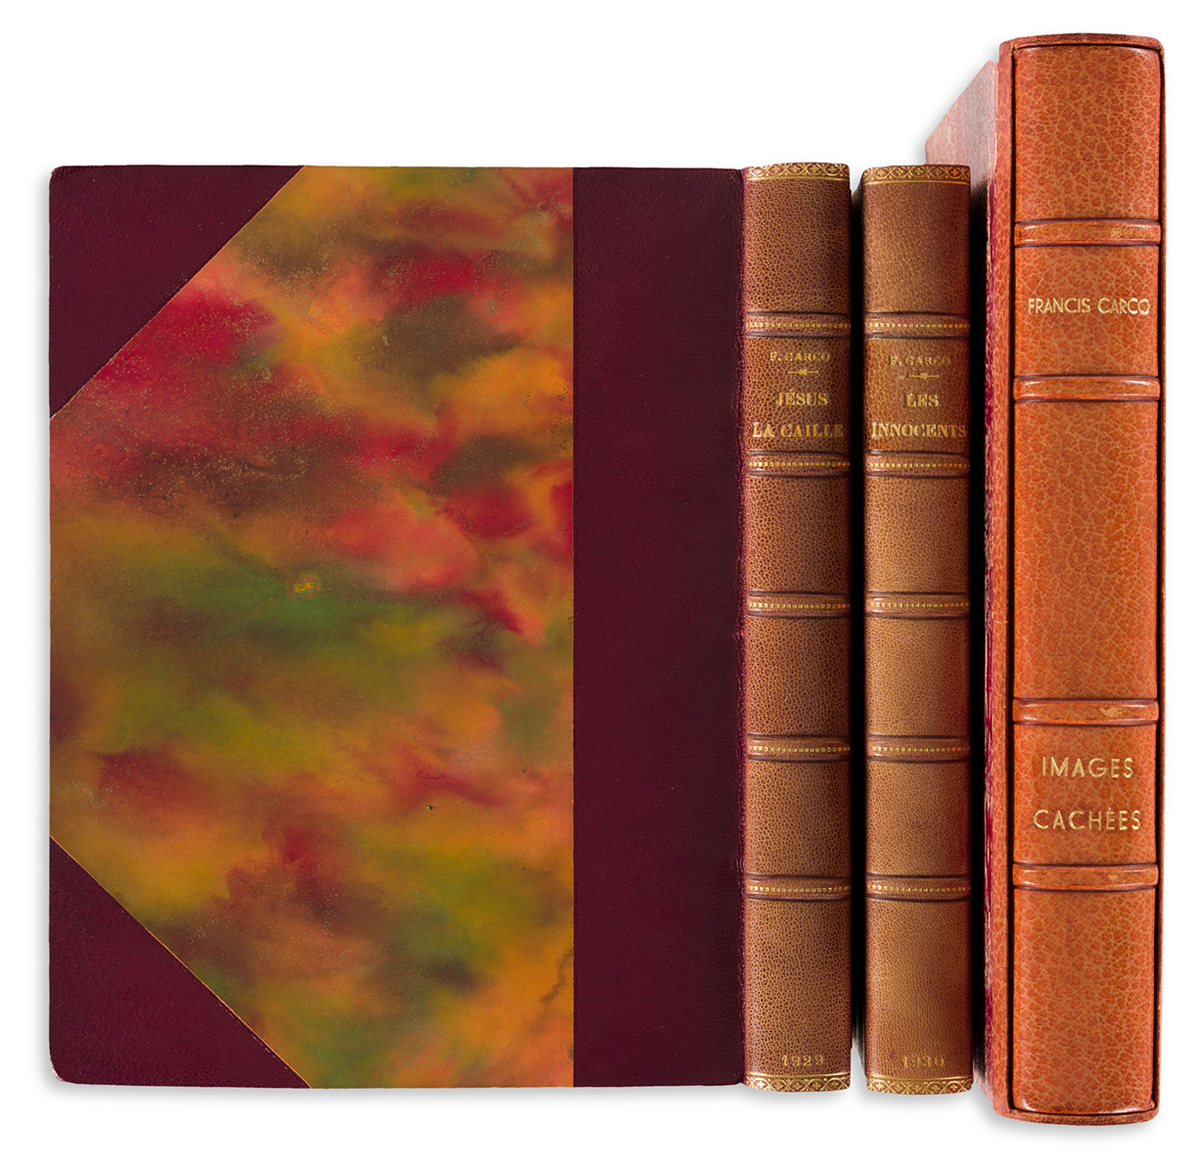 FRANCIS CARCO (1886-1958) Three Limited Edition Titles.